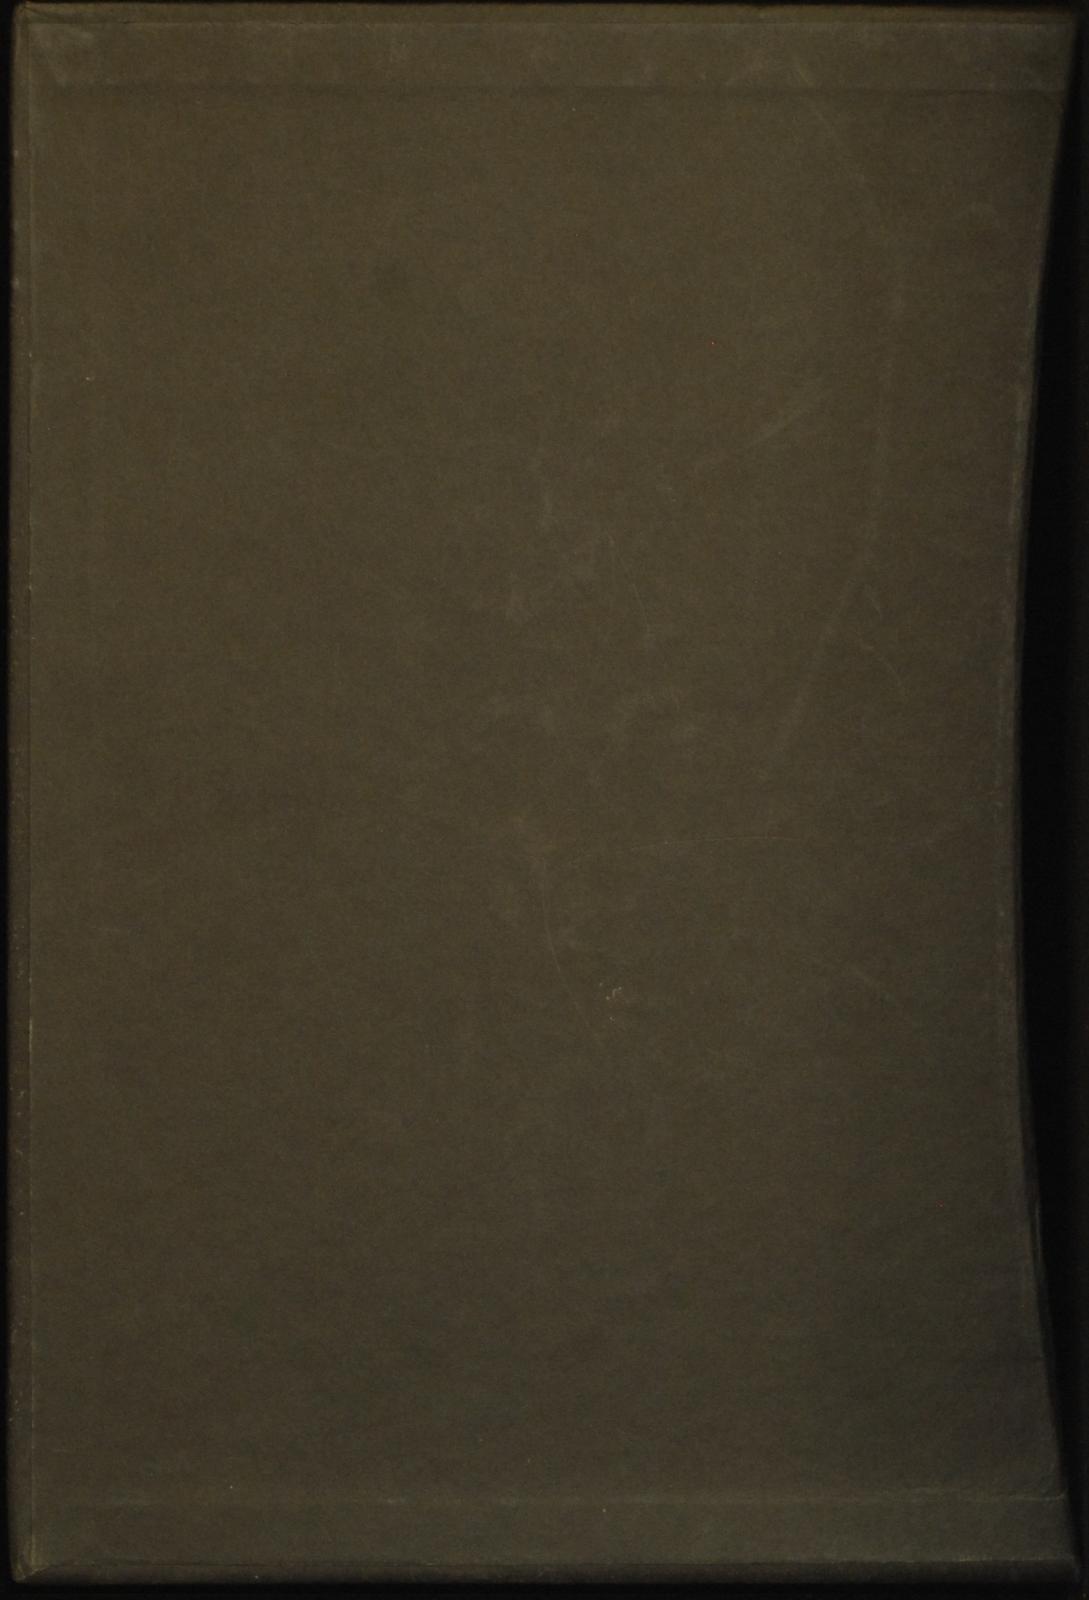 mbb006202b_-_Stevenson_Robert_Louis_-_The_Amateur_Emigrant_And_The_Silverado_Squatters_-_Contains_Illustrations.jpg